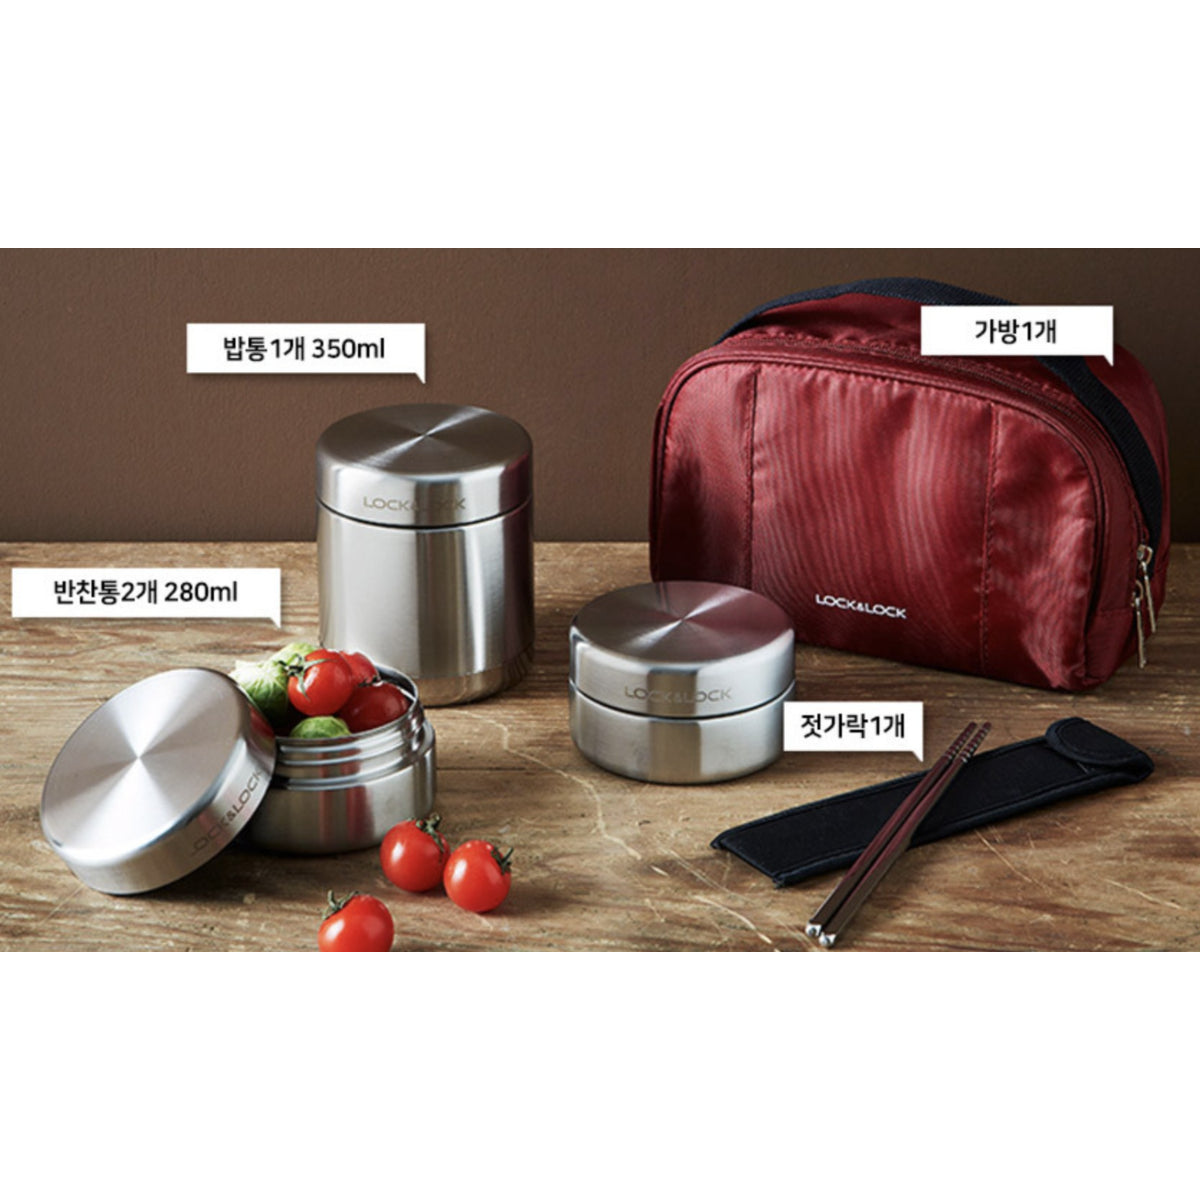 LocknLock Stainless Steel Insulated Thermal Lunch Box 450ml with Black –  BODASADA